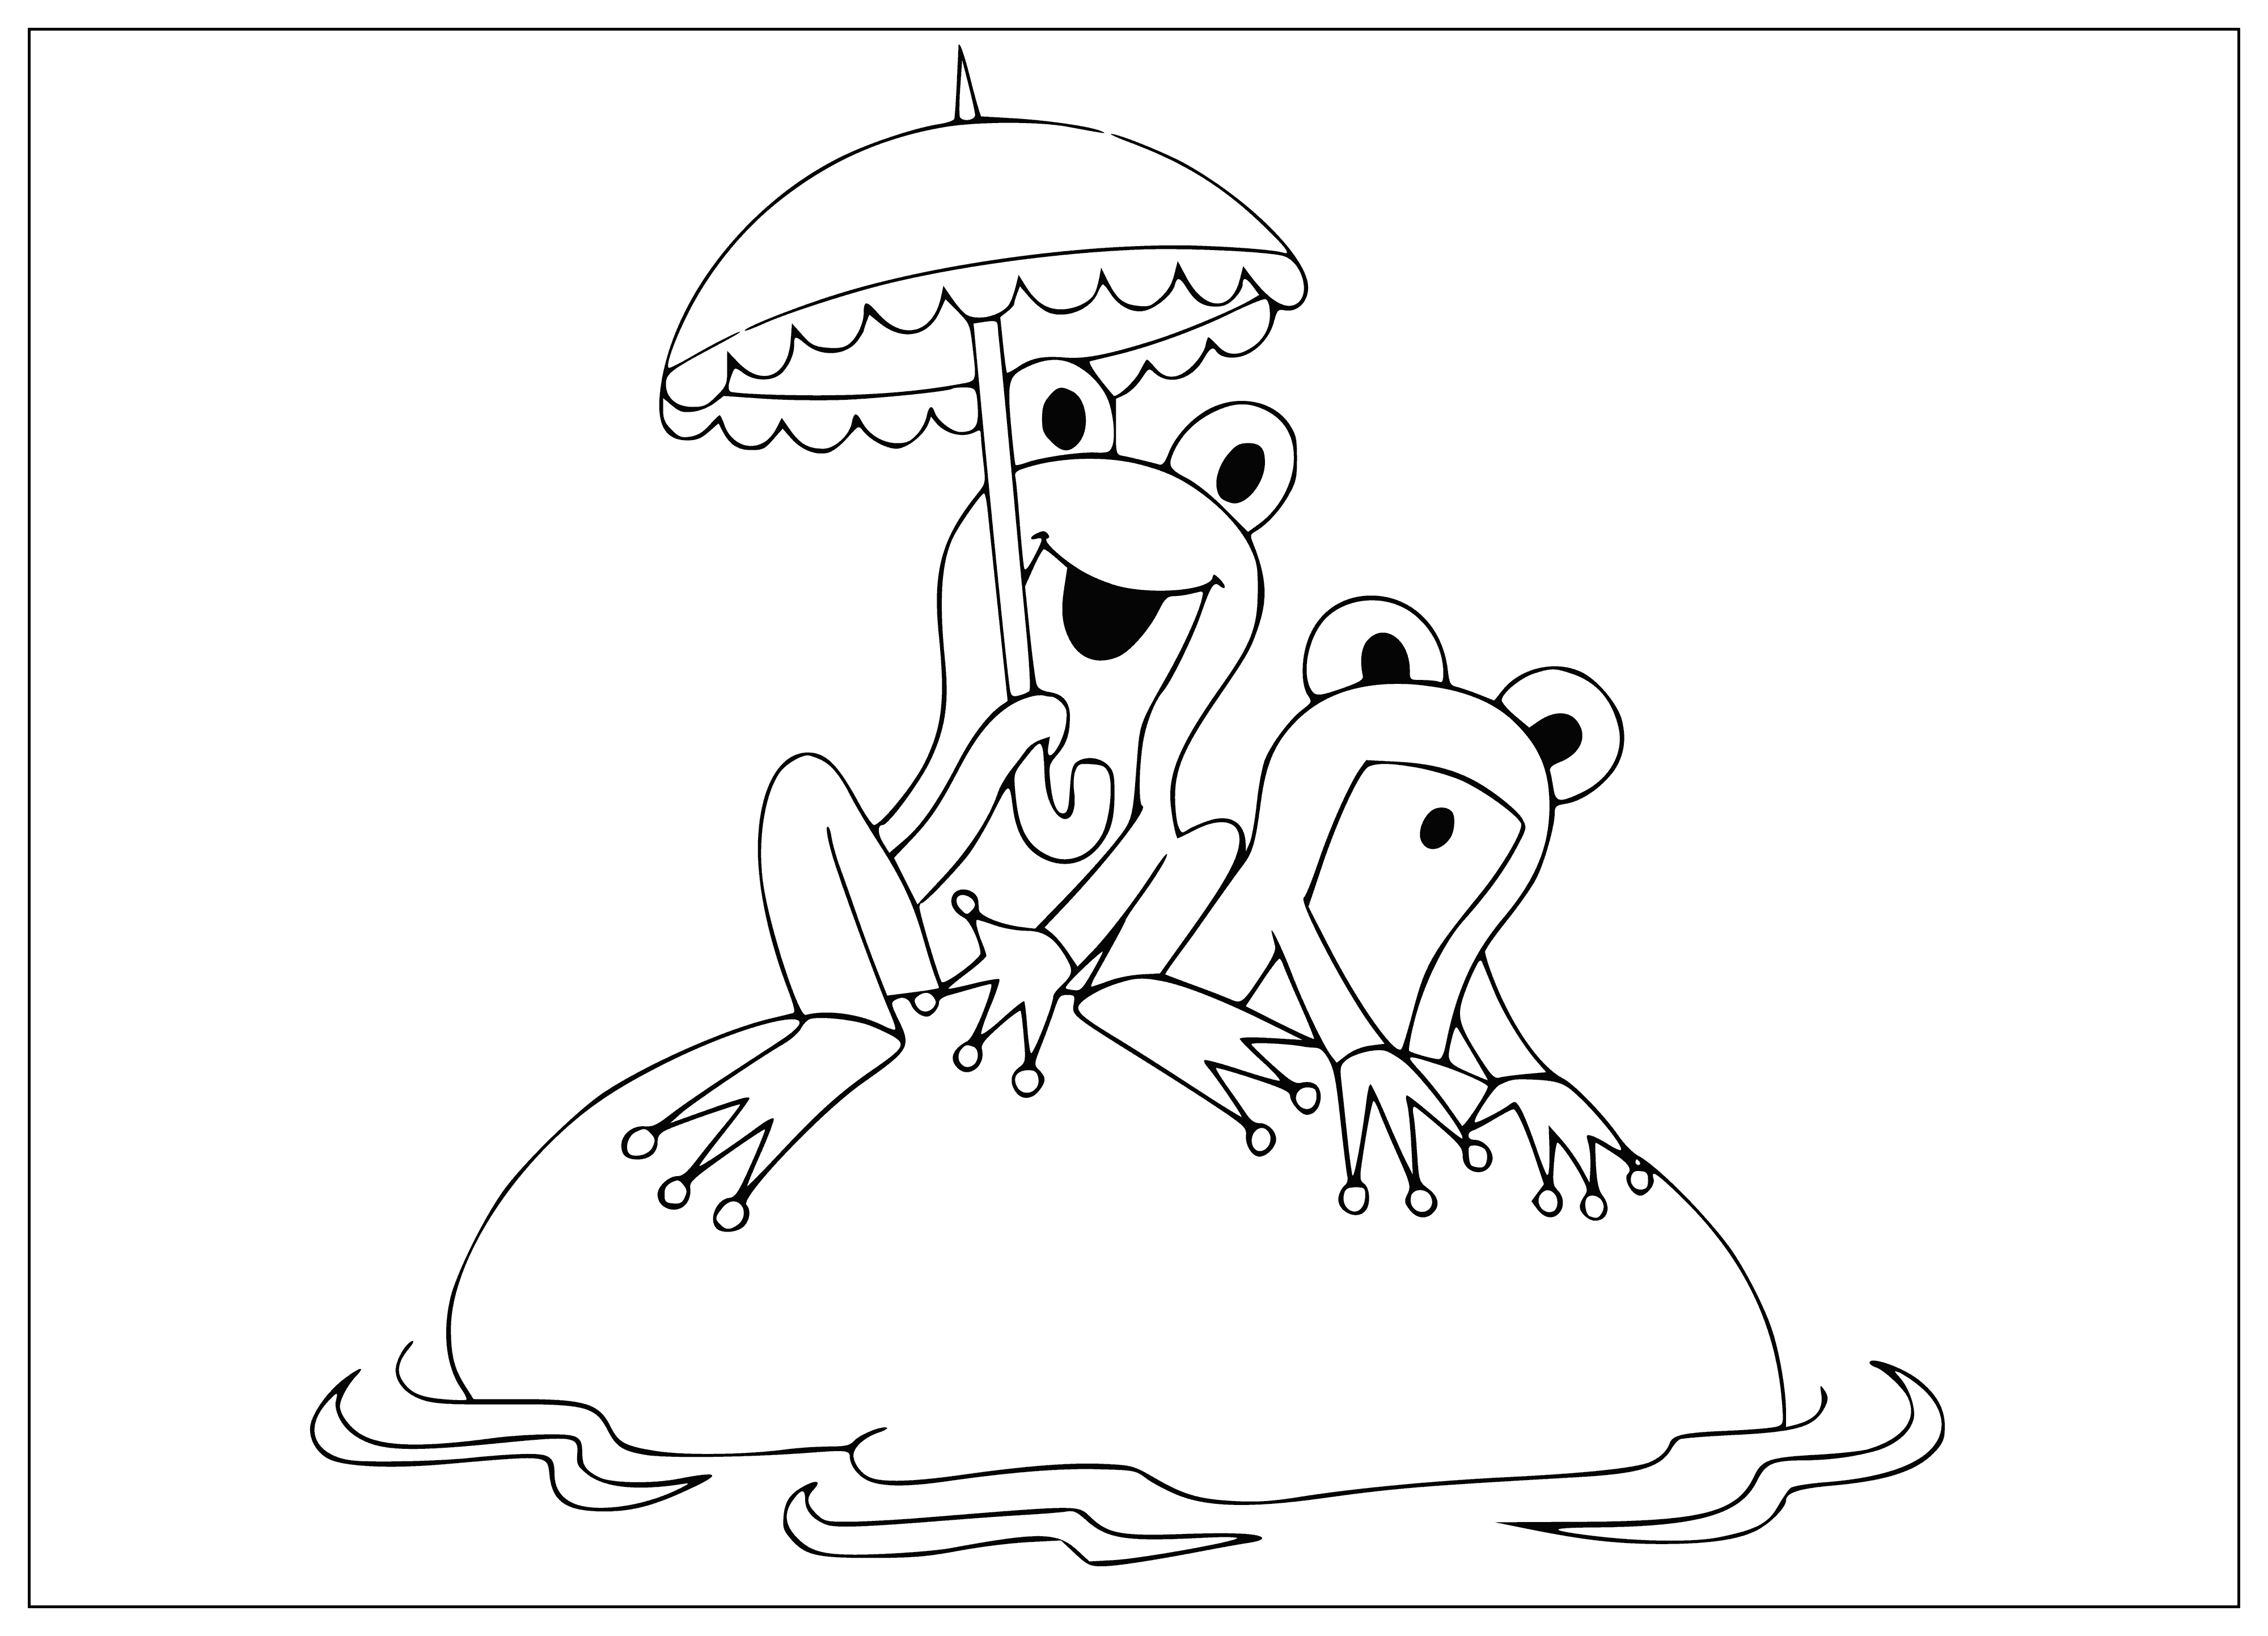 Frogs coloring page